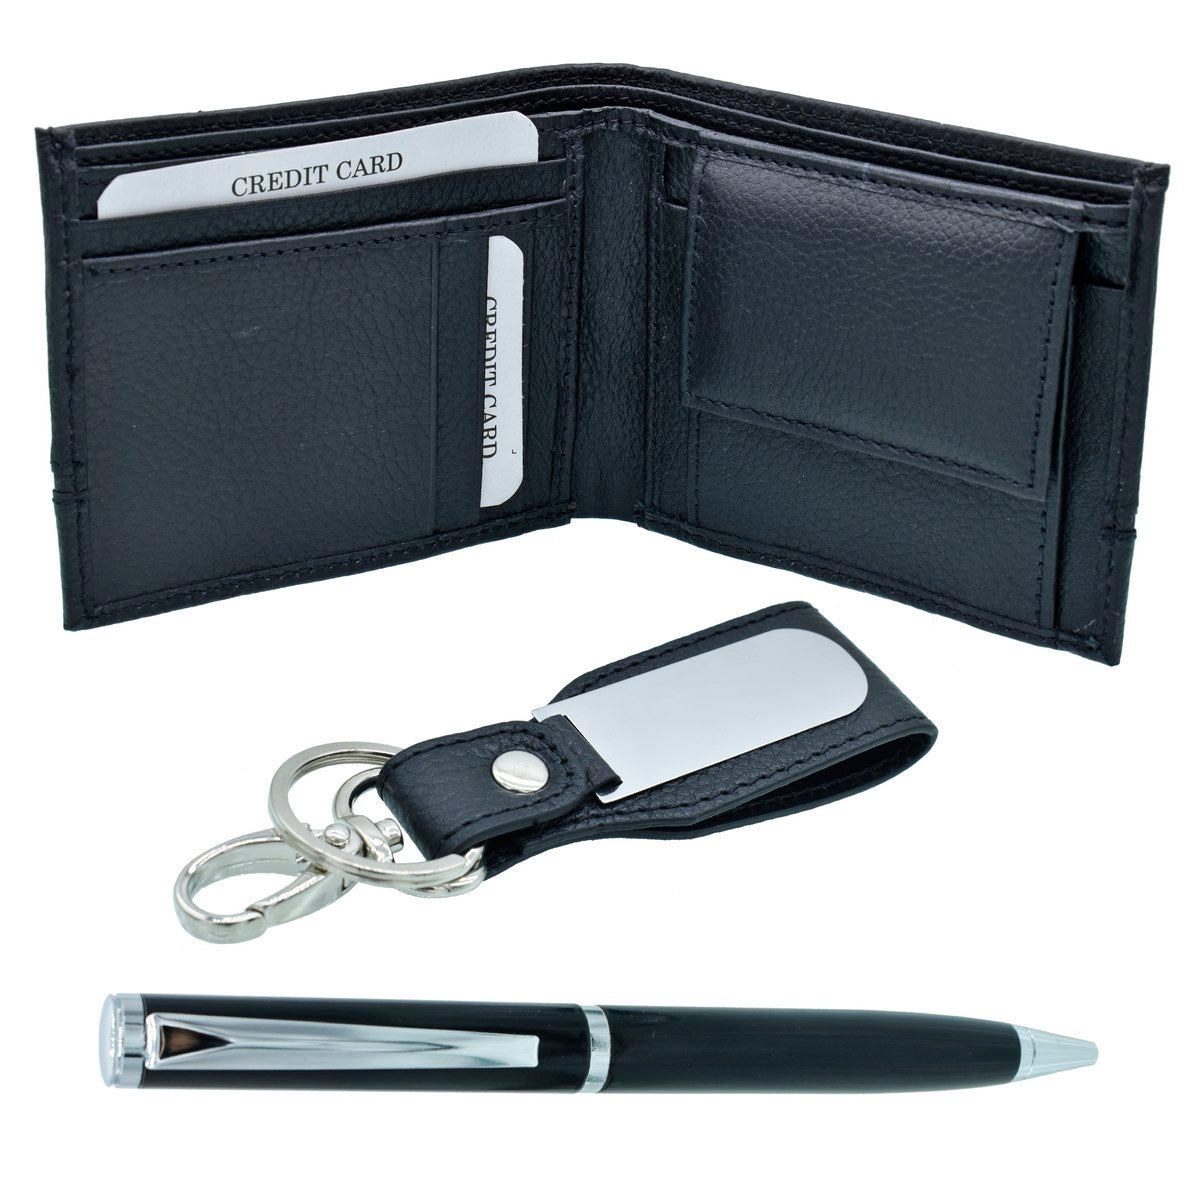 Black 3in1 Pen, Wallet, and Keychain Gift Set - For Employee Joining Kit, Corporate, Client or Dealer Gifting JA5